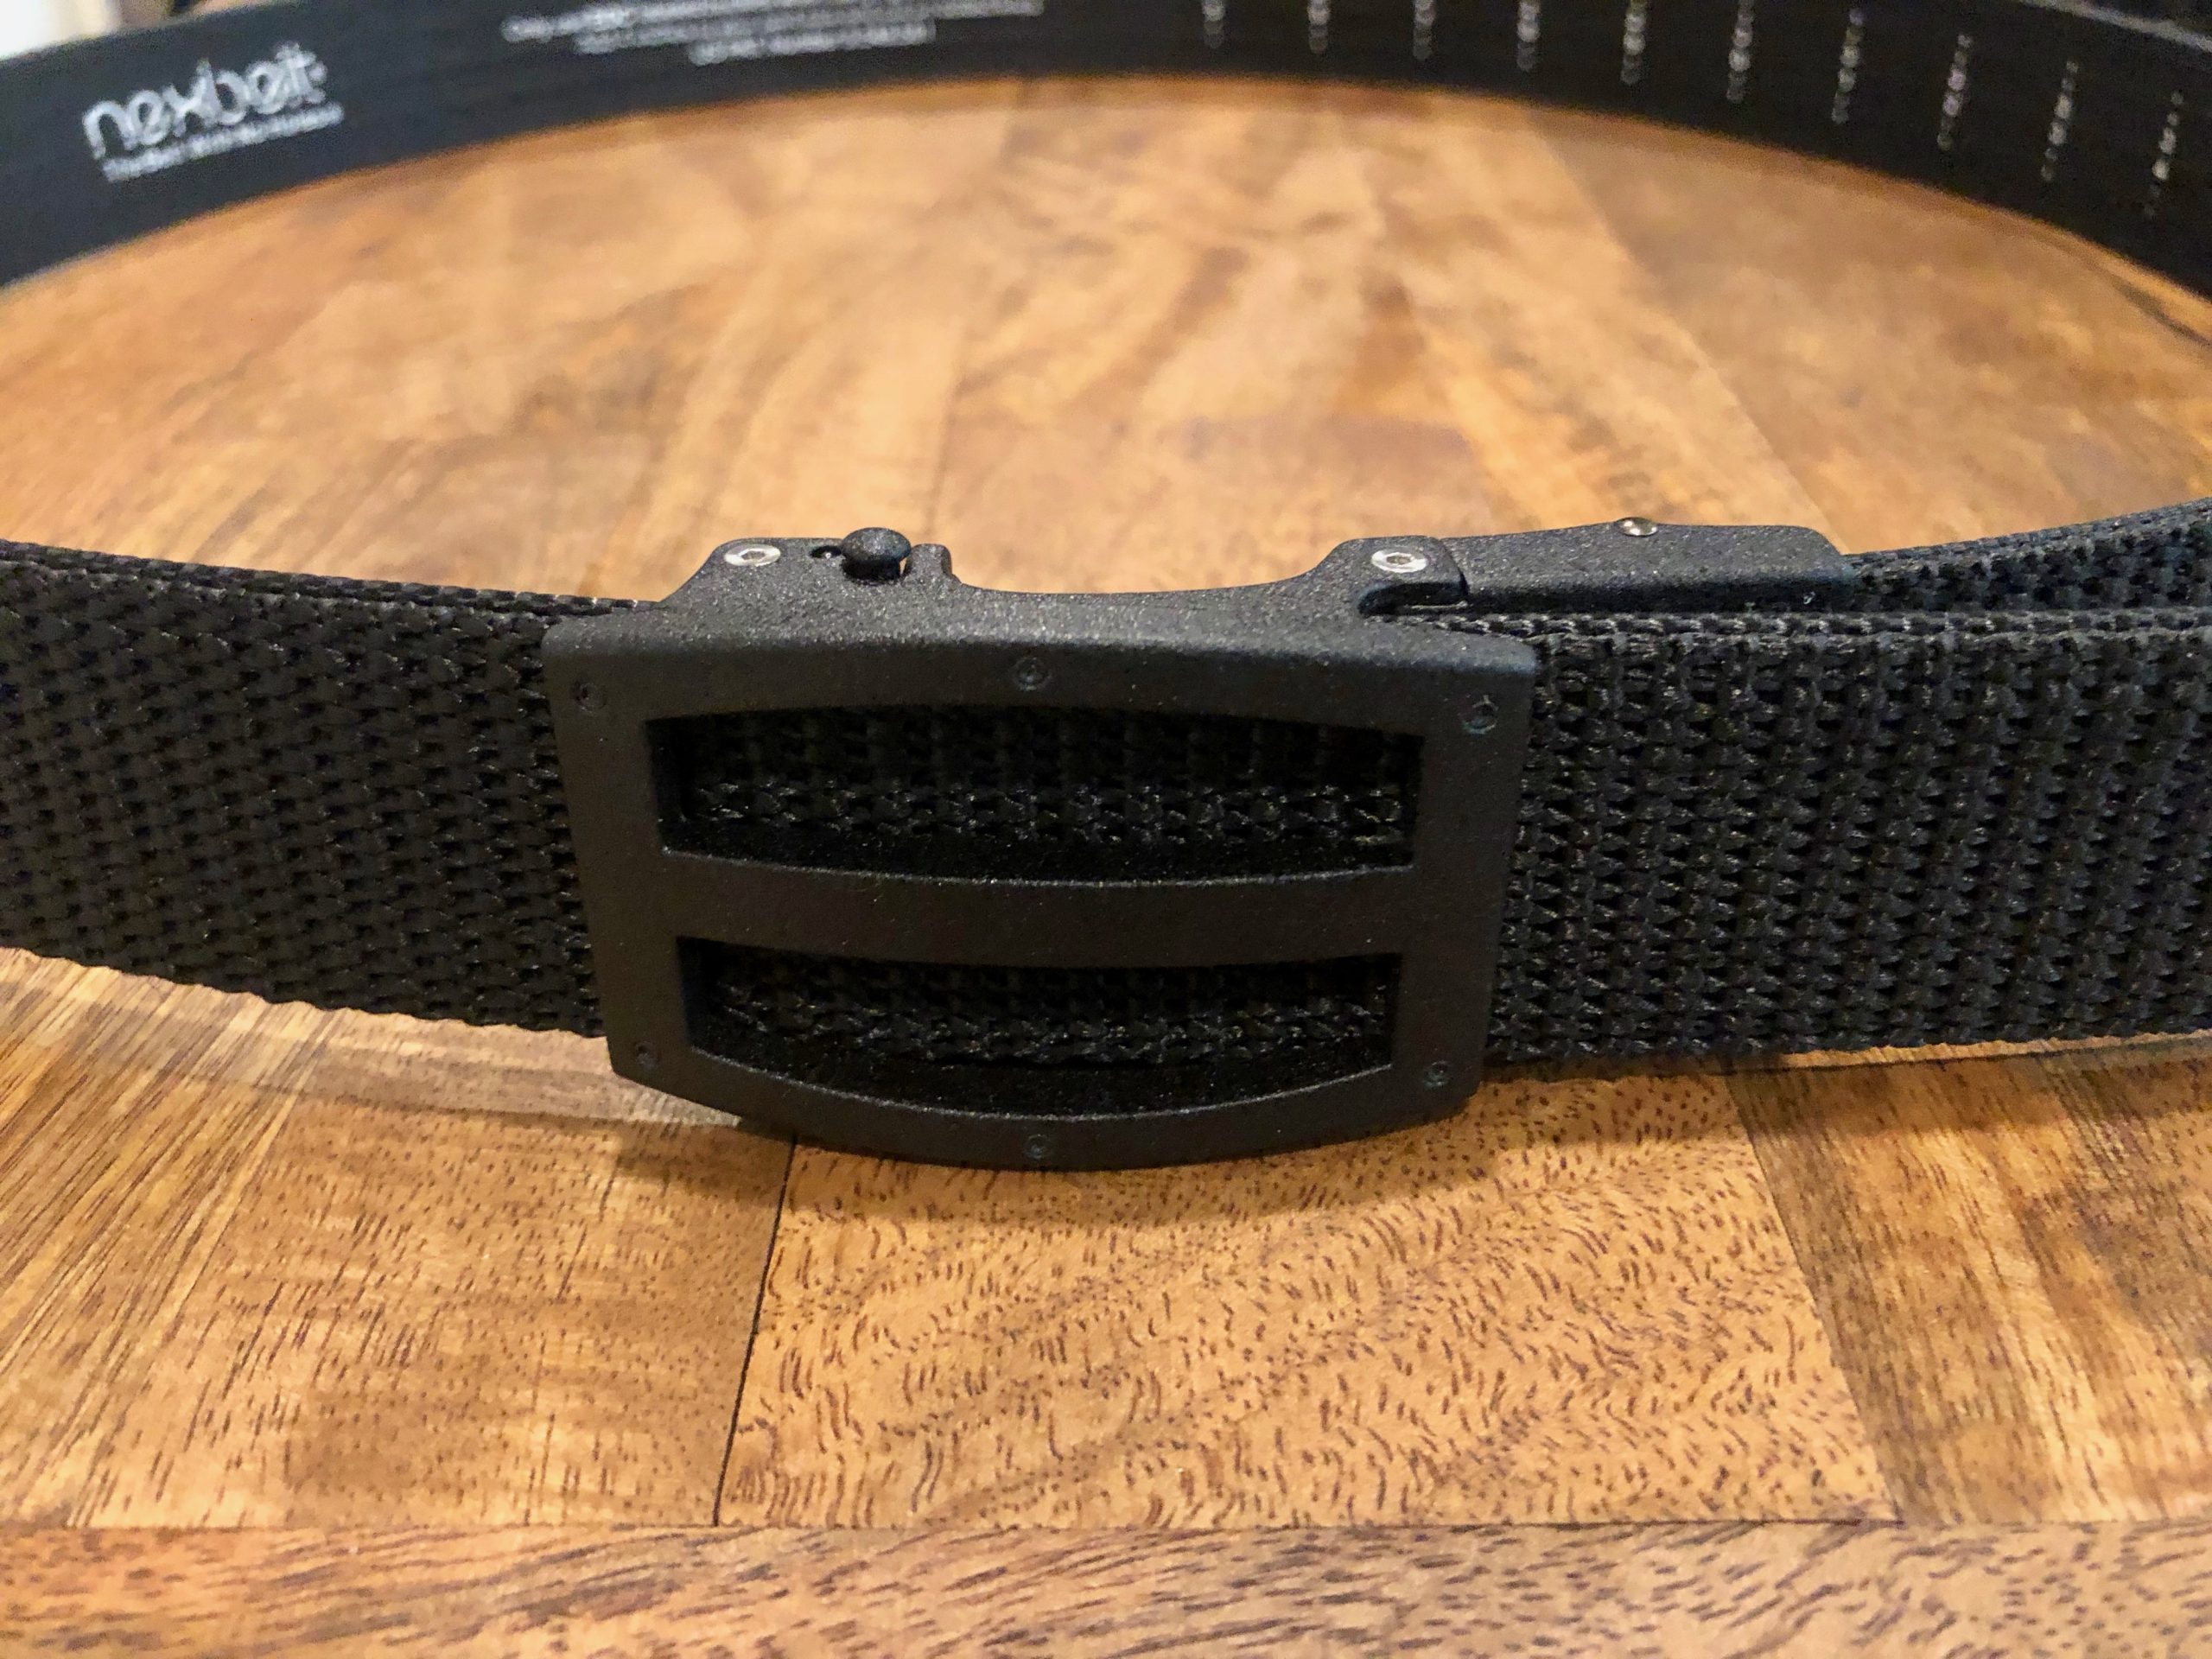 NEXBELT – The one belt that may hook you! – EpicTactical